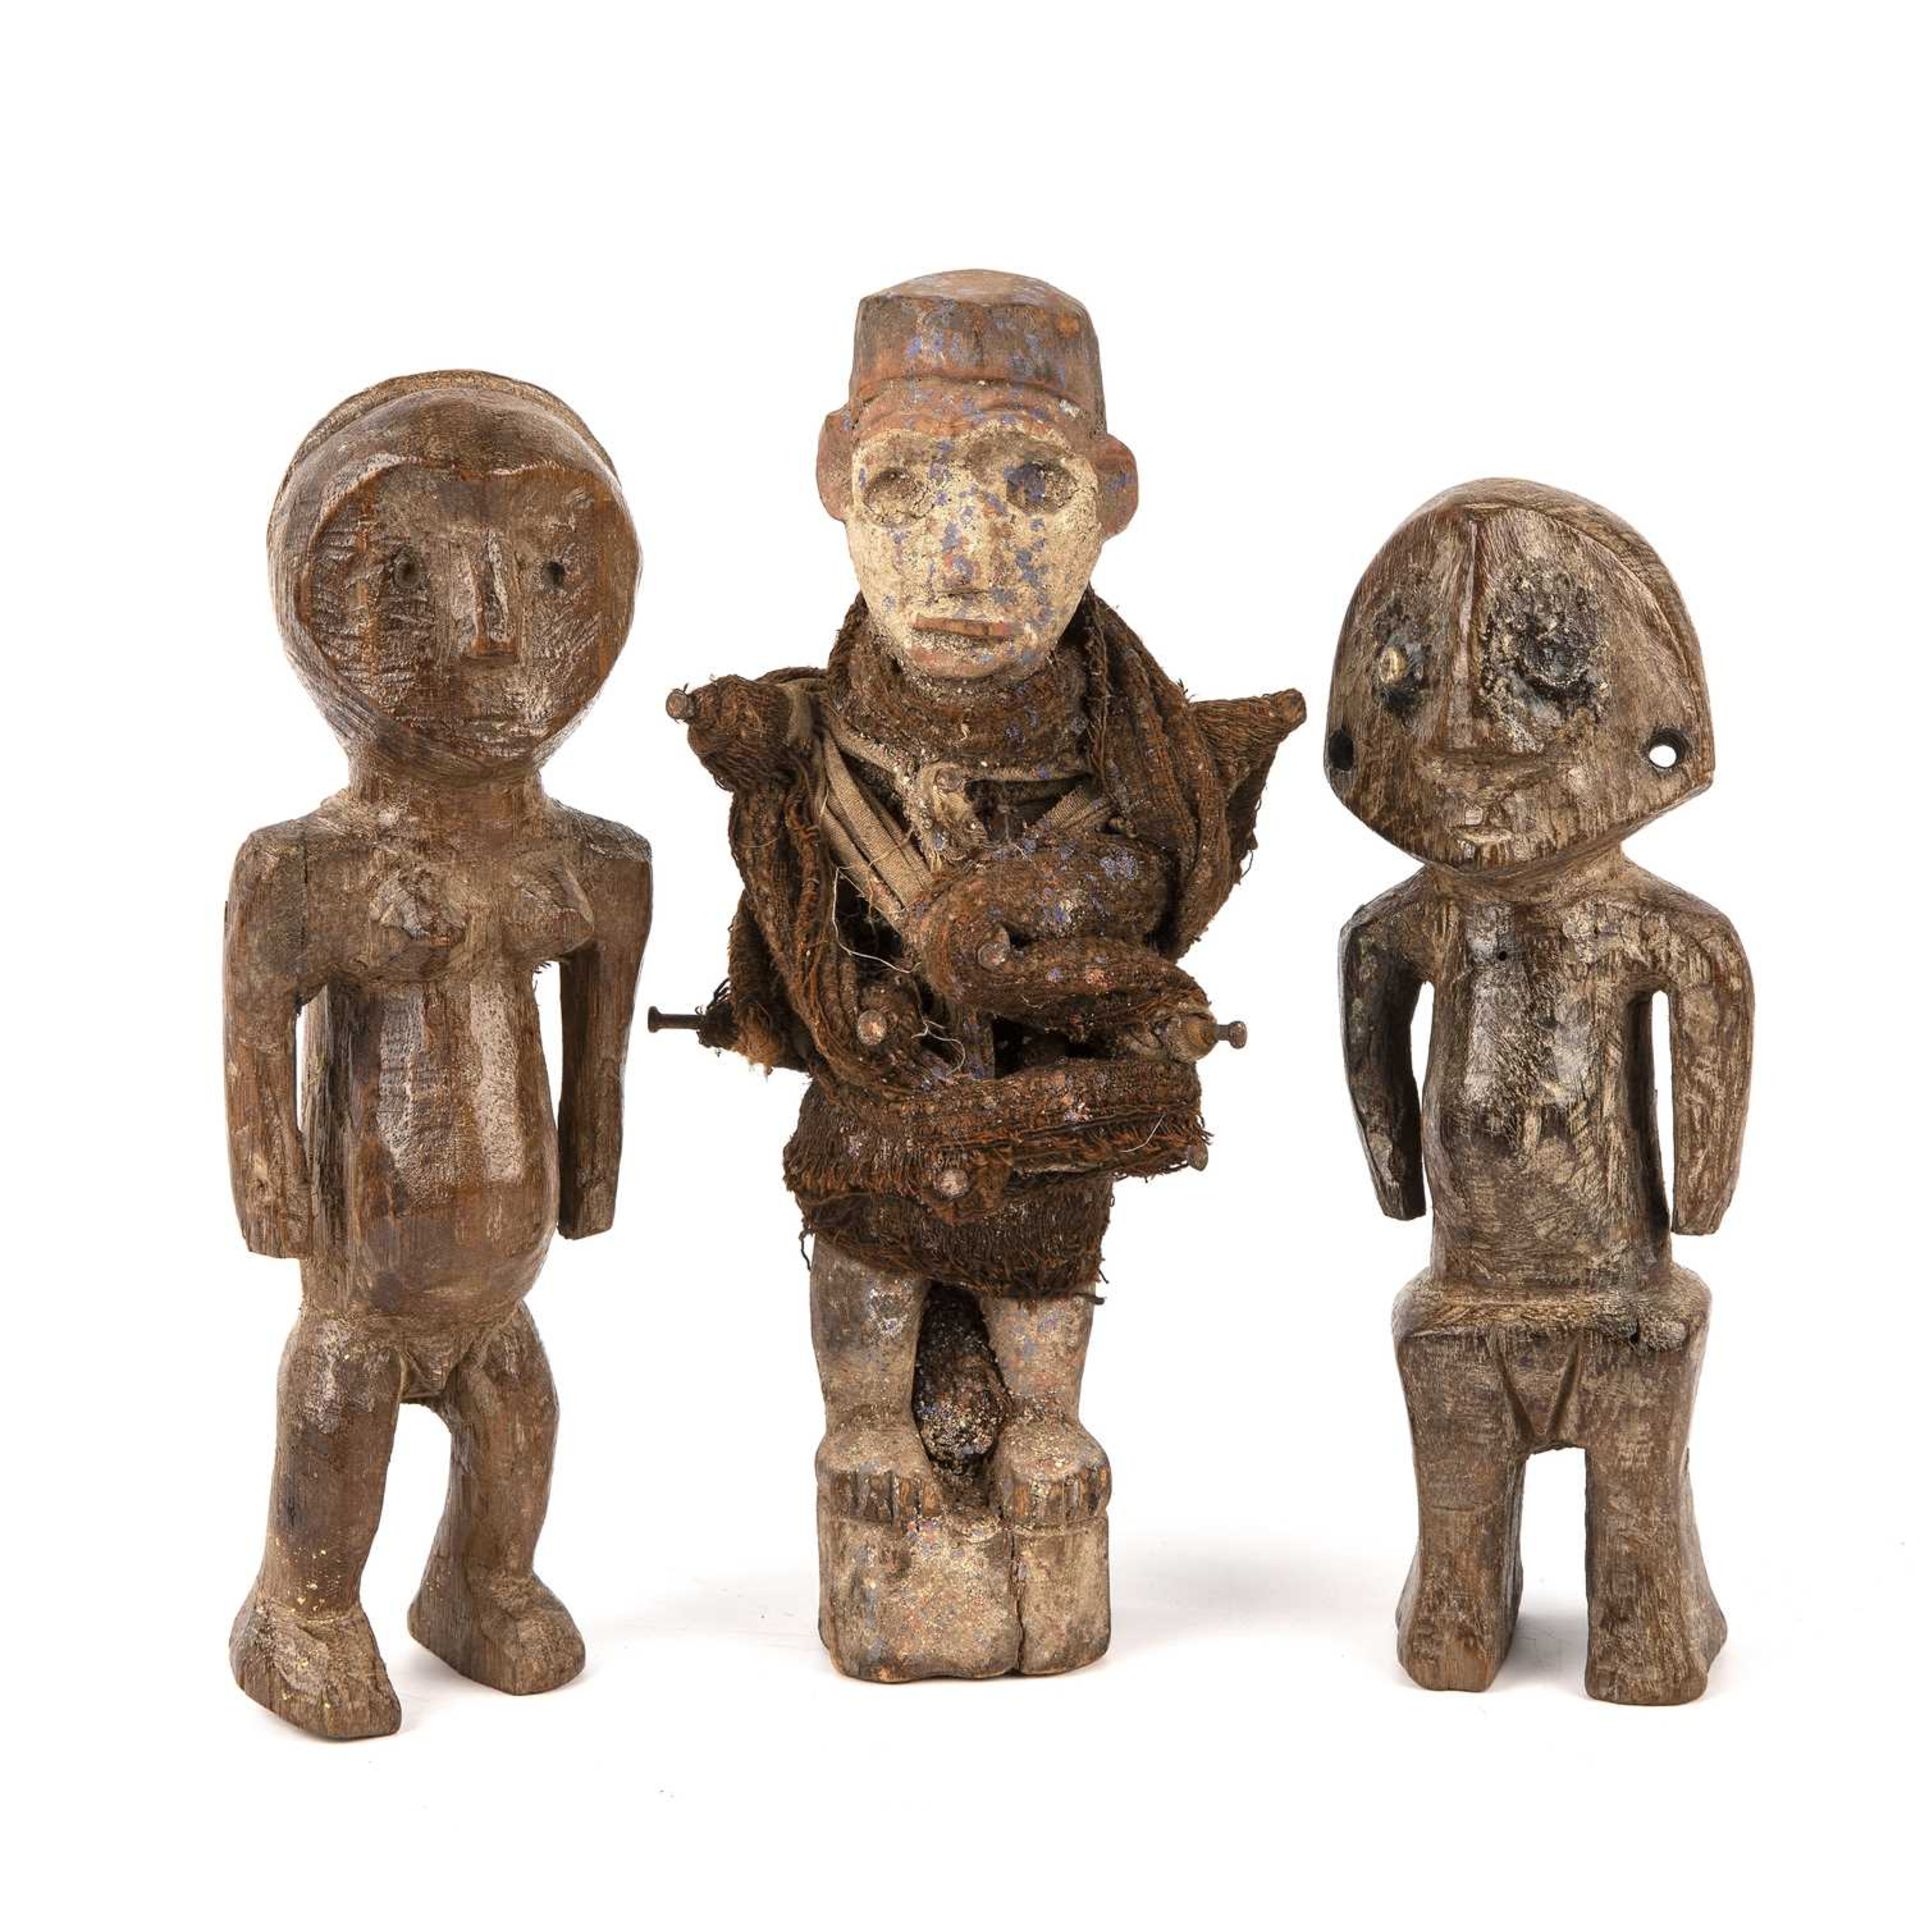 An African fetish figure 27cm high and two Congo figures 24cm high. Good with several smal surface